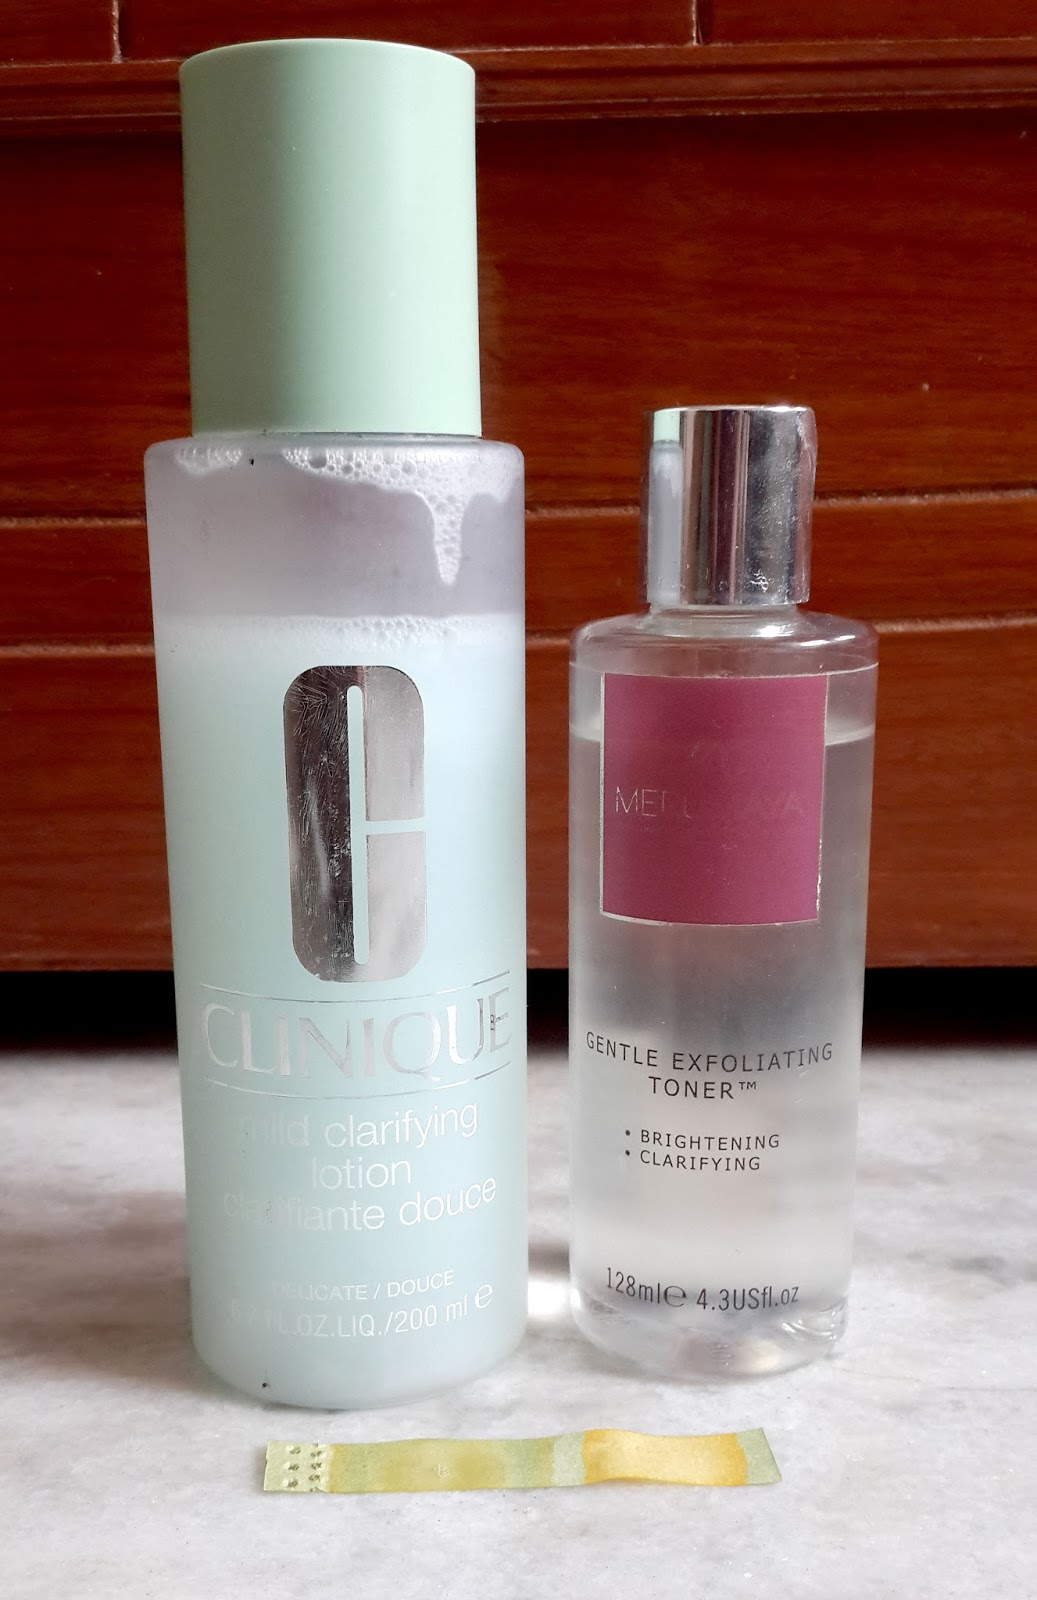 Sleuth: REVIEW: Clinique Mild Clarifying Lotion